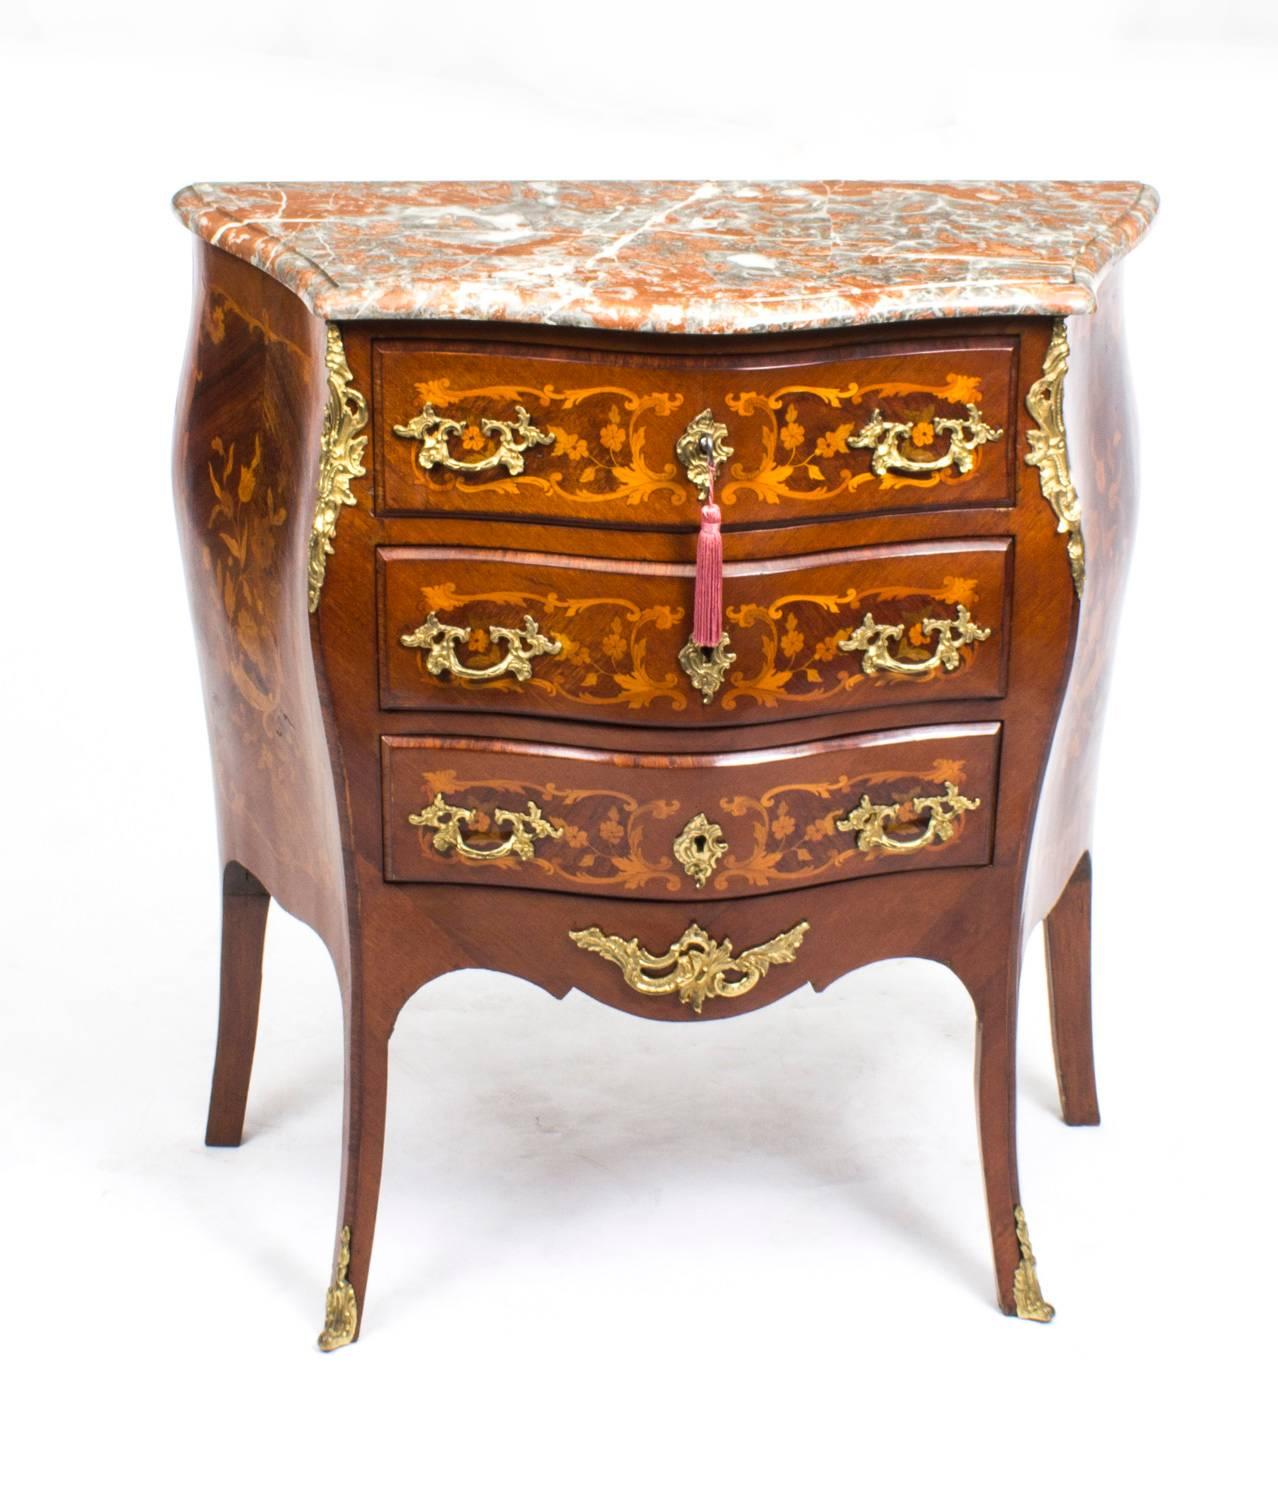 This is a stunning antique kingwood and Gonçalo Alves  Louis XV Revival serpentine fronted marble top commode, circa 1880 in date. 

This gorgeous commode has three drawers, for ample storage, and was inspired by the Louis XV style. Elaborately